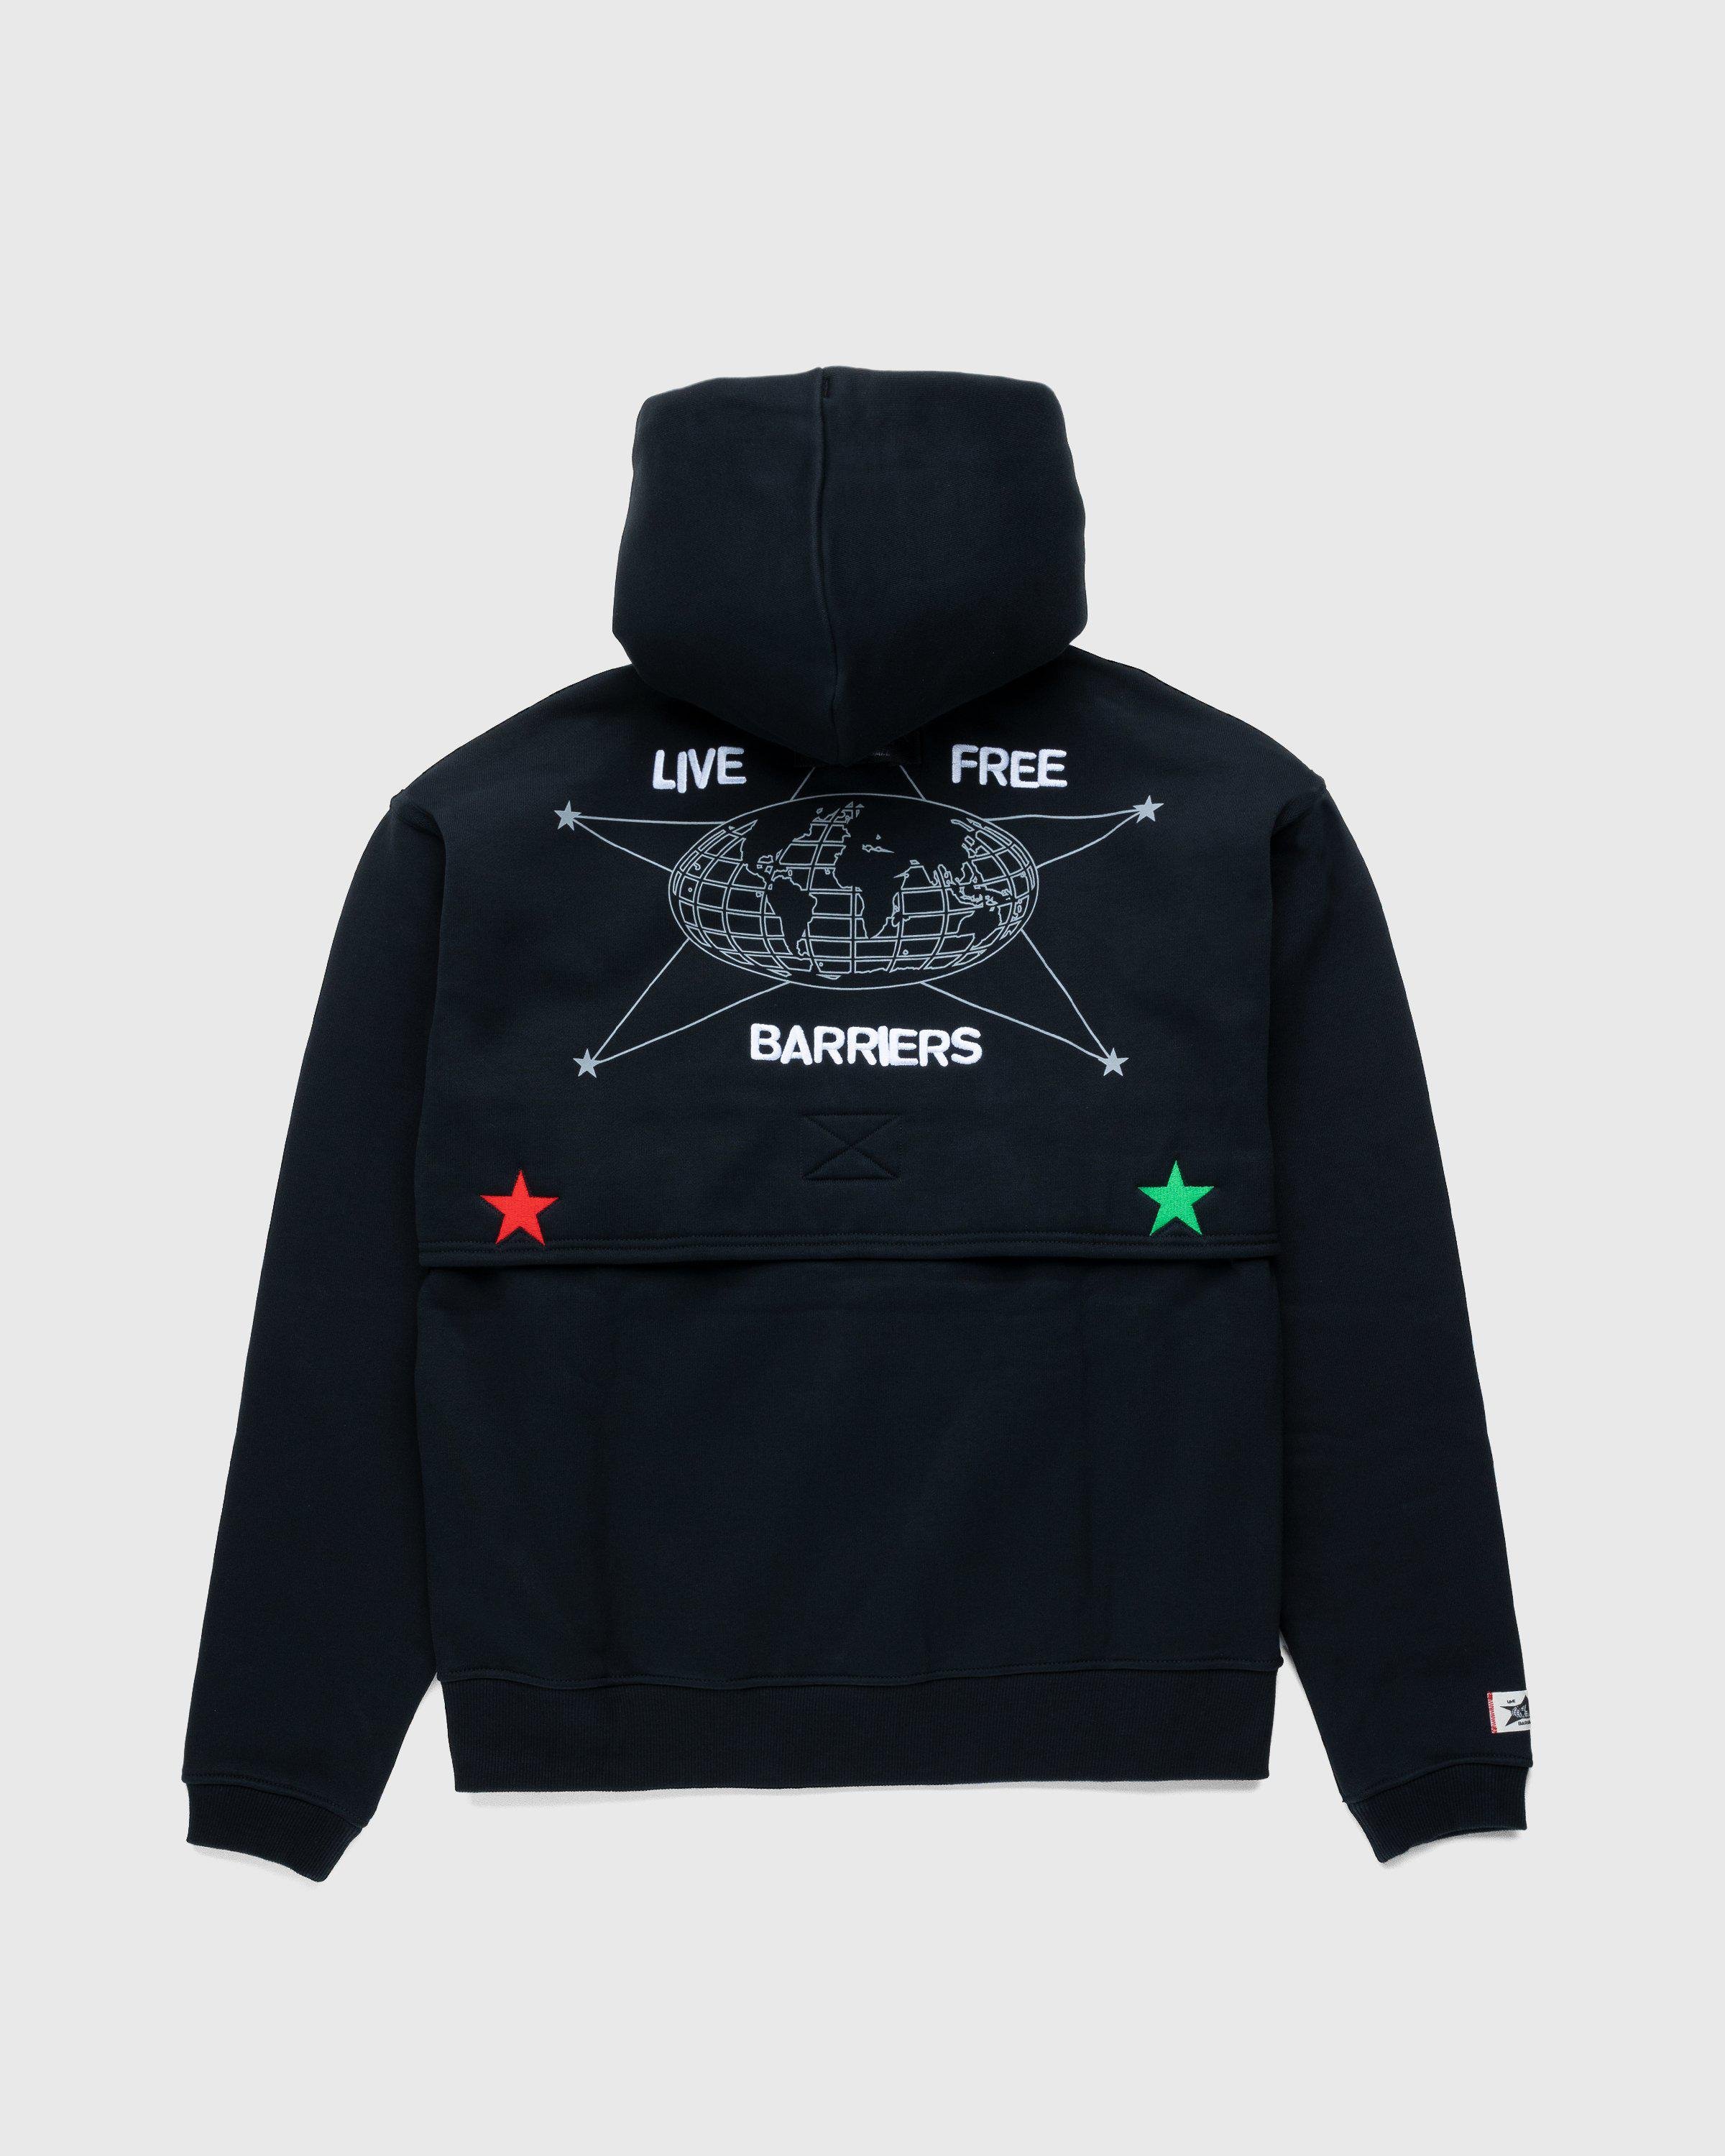 Converse x Barriers – Court Ready Hoodie Black by CONVERSE X BARRIERS